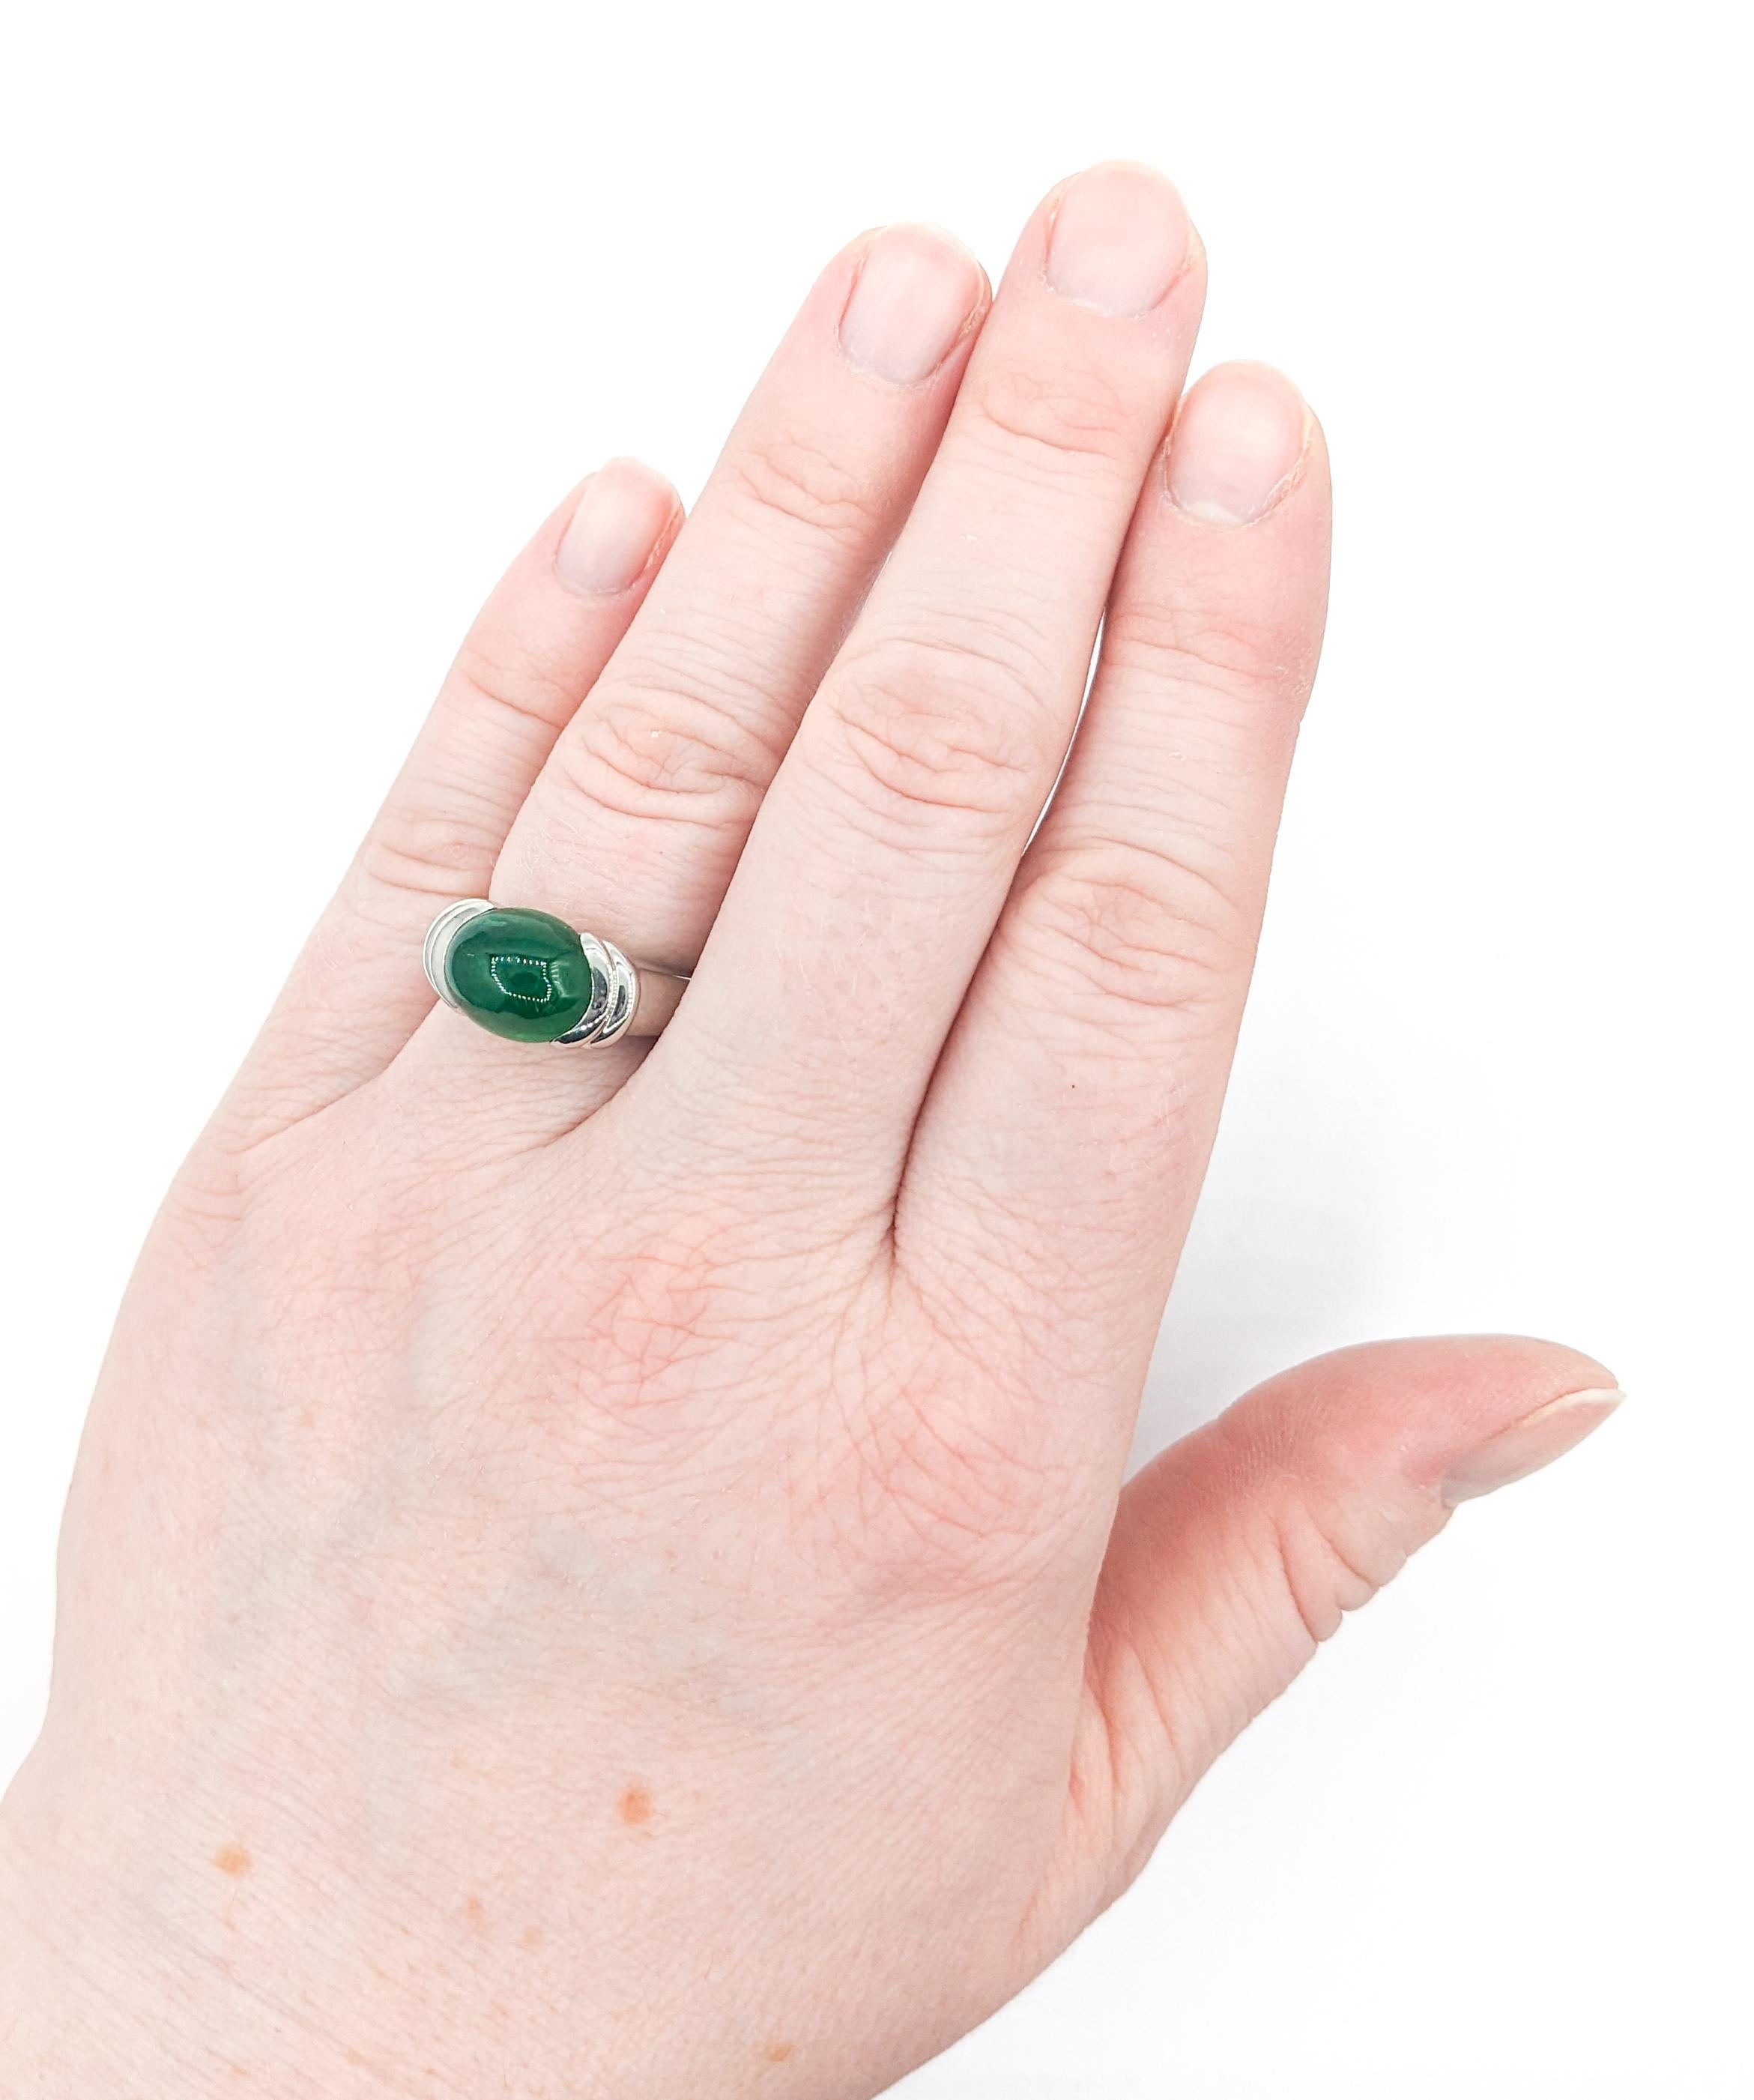 Half Bezel 5.27ct Cabochon Emerald Ring In Platinum In Excellent Condition For Sale In Bloomington, MN